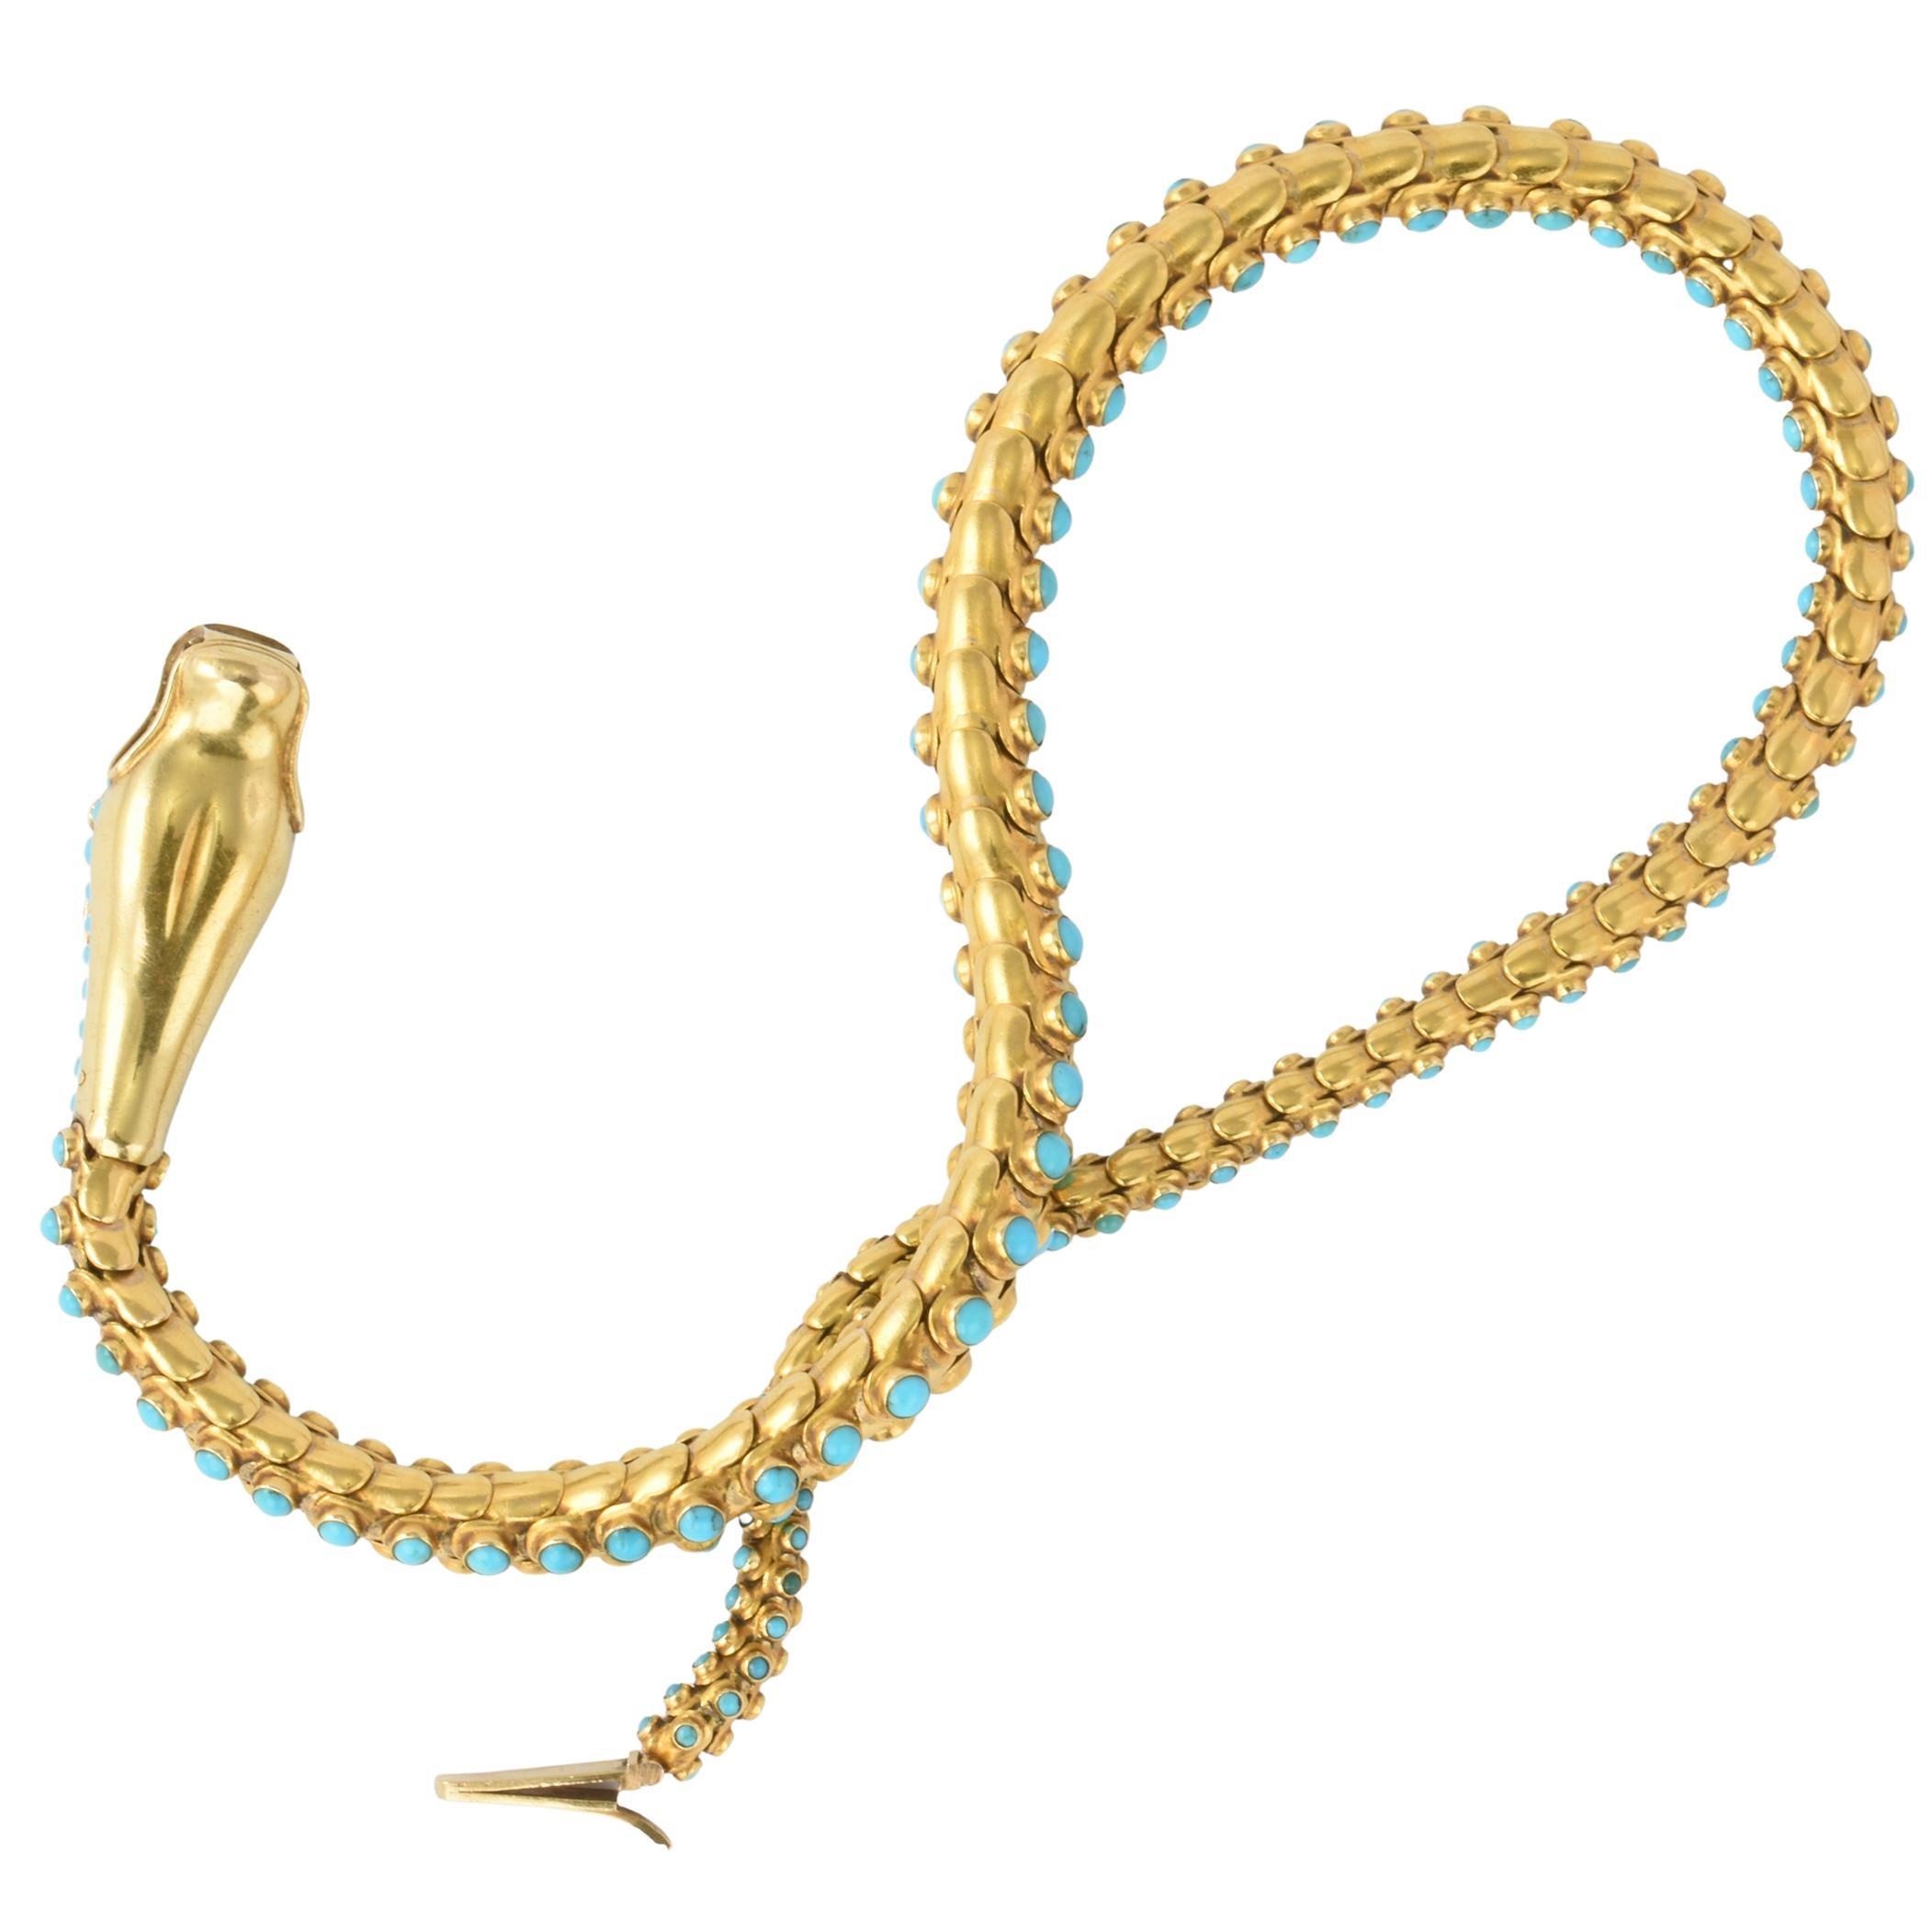 Victorian 15k Gold & Turquoise Snake Necklace, circa 1860 In Good Condition For Sale In Wilmslow, GB